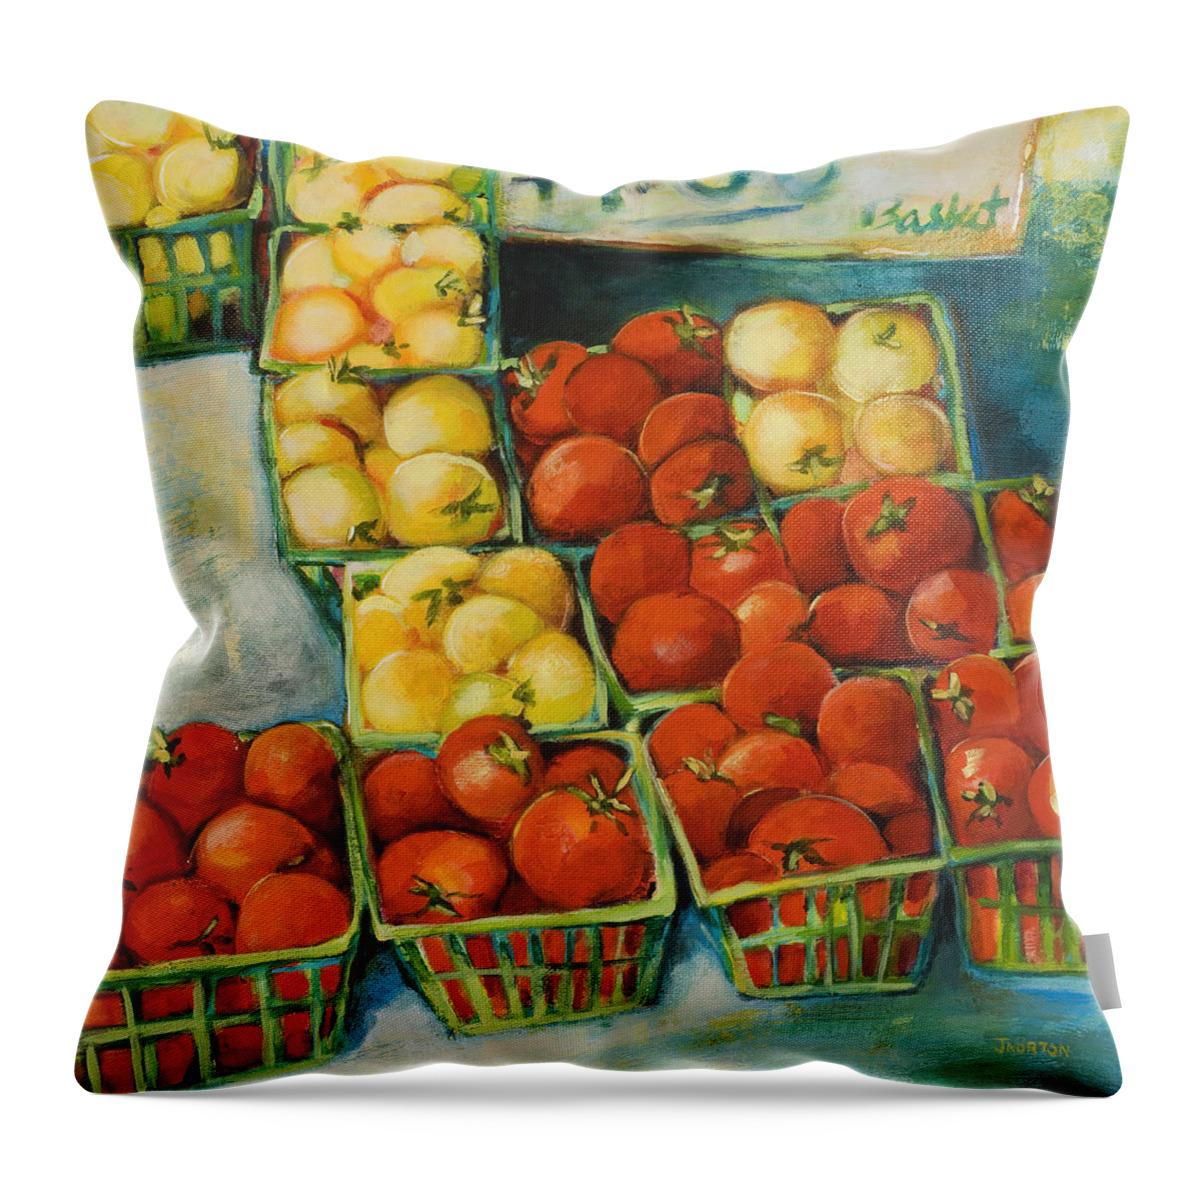 Cherry Tomatoes Throw Pillow featuring the painting Cherry Tomatoes by Jen Norton